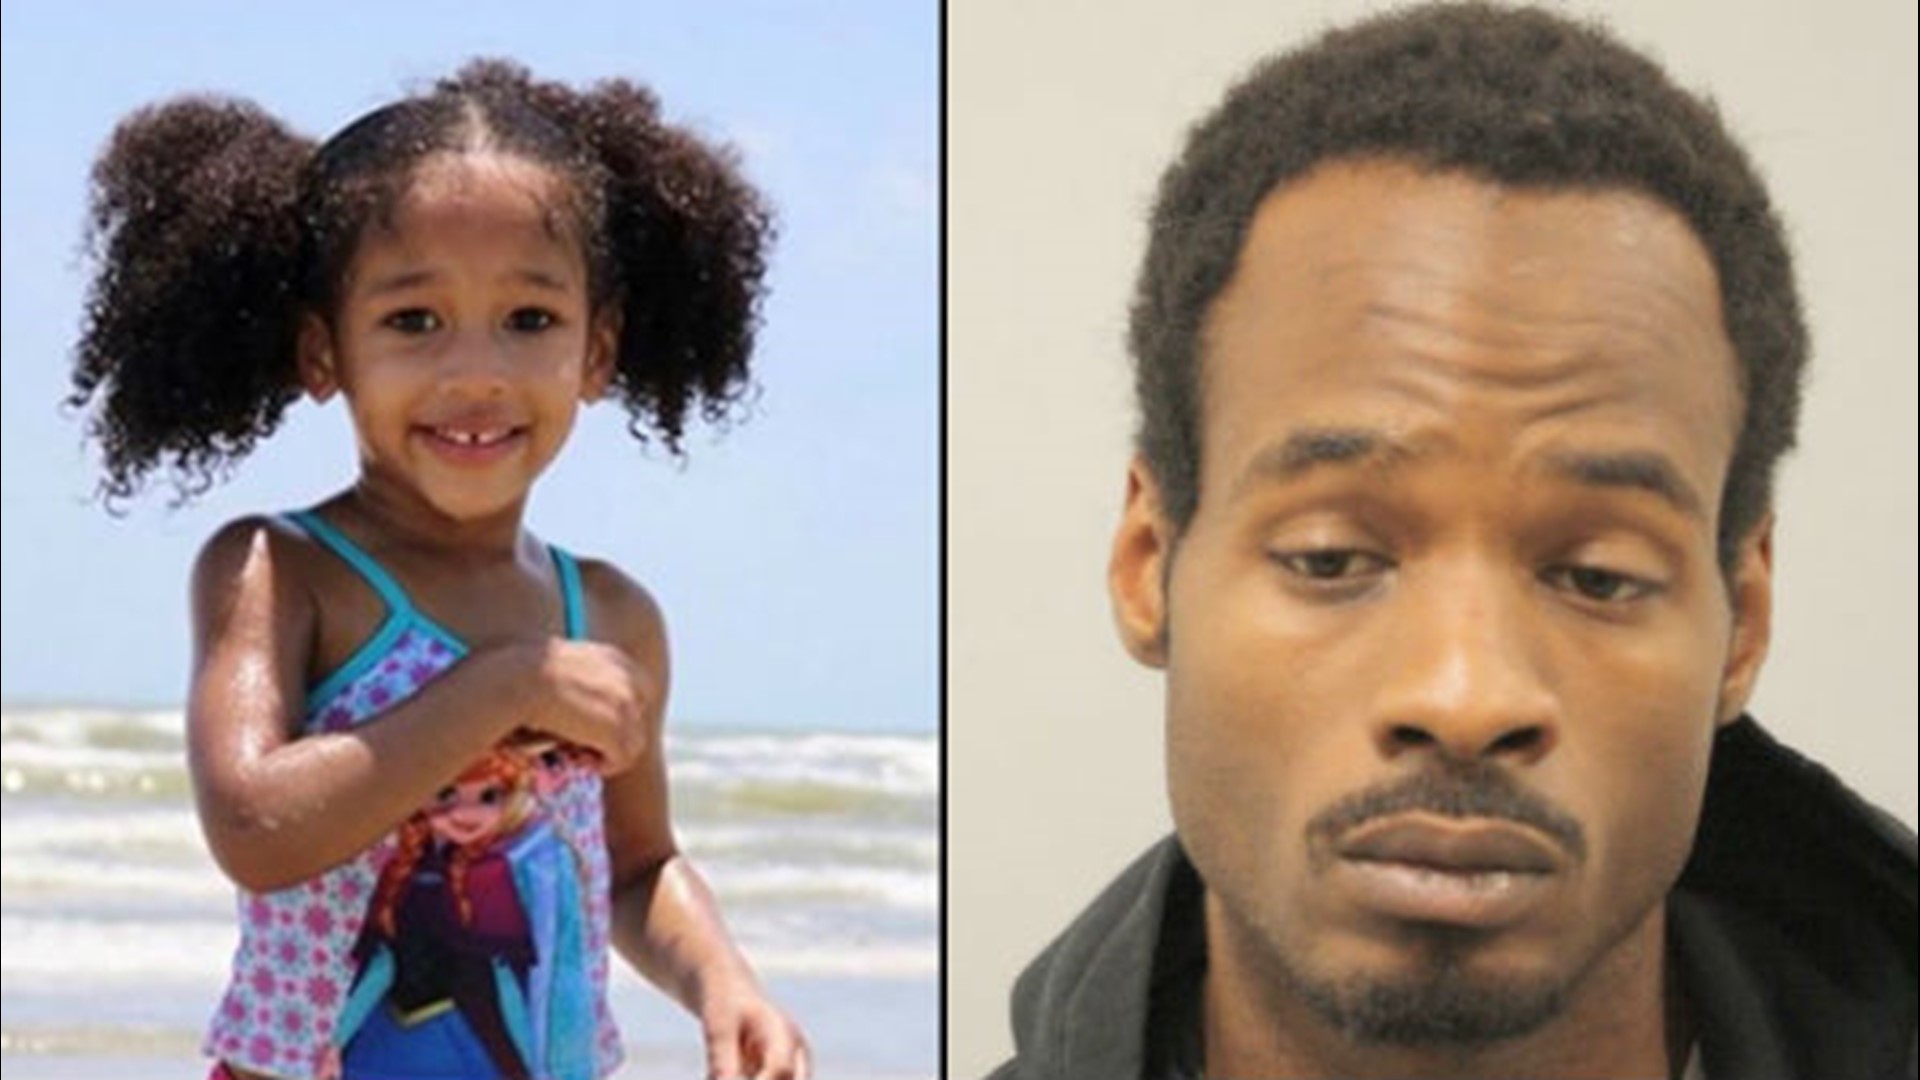 Houston Police and Texas Equusearch founder Tim Miller flew to Arkansas to collect what may be the remains of missing 4-year-old Maleah Davis. The remains are in the identification process. Meanwhile, KHOU 11 News learned a potential witness in Arkansas may have seen her stepfather Derion Vence.